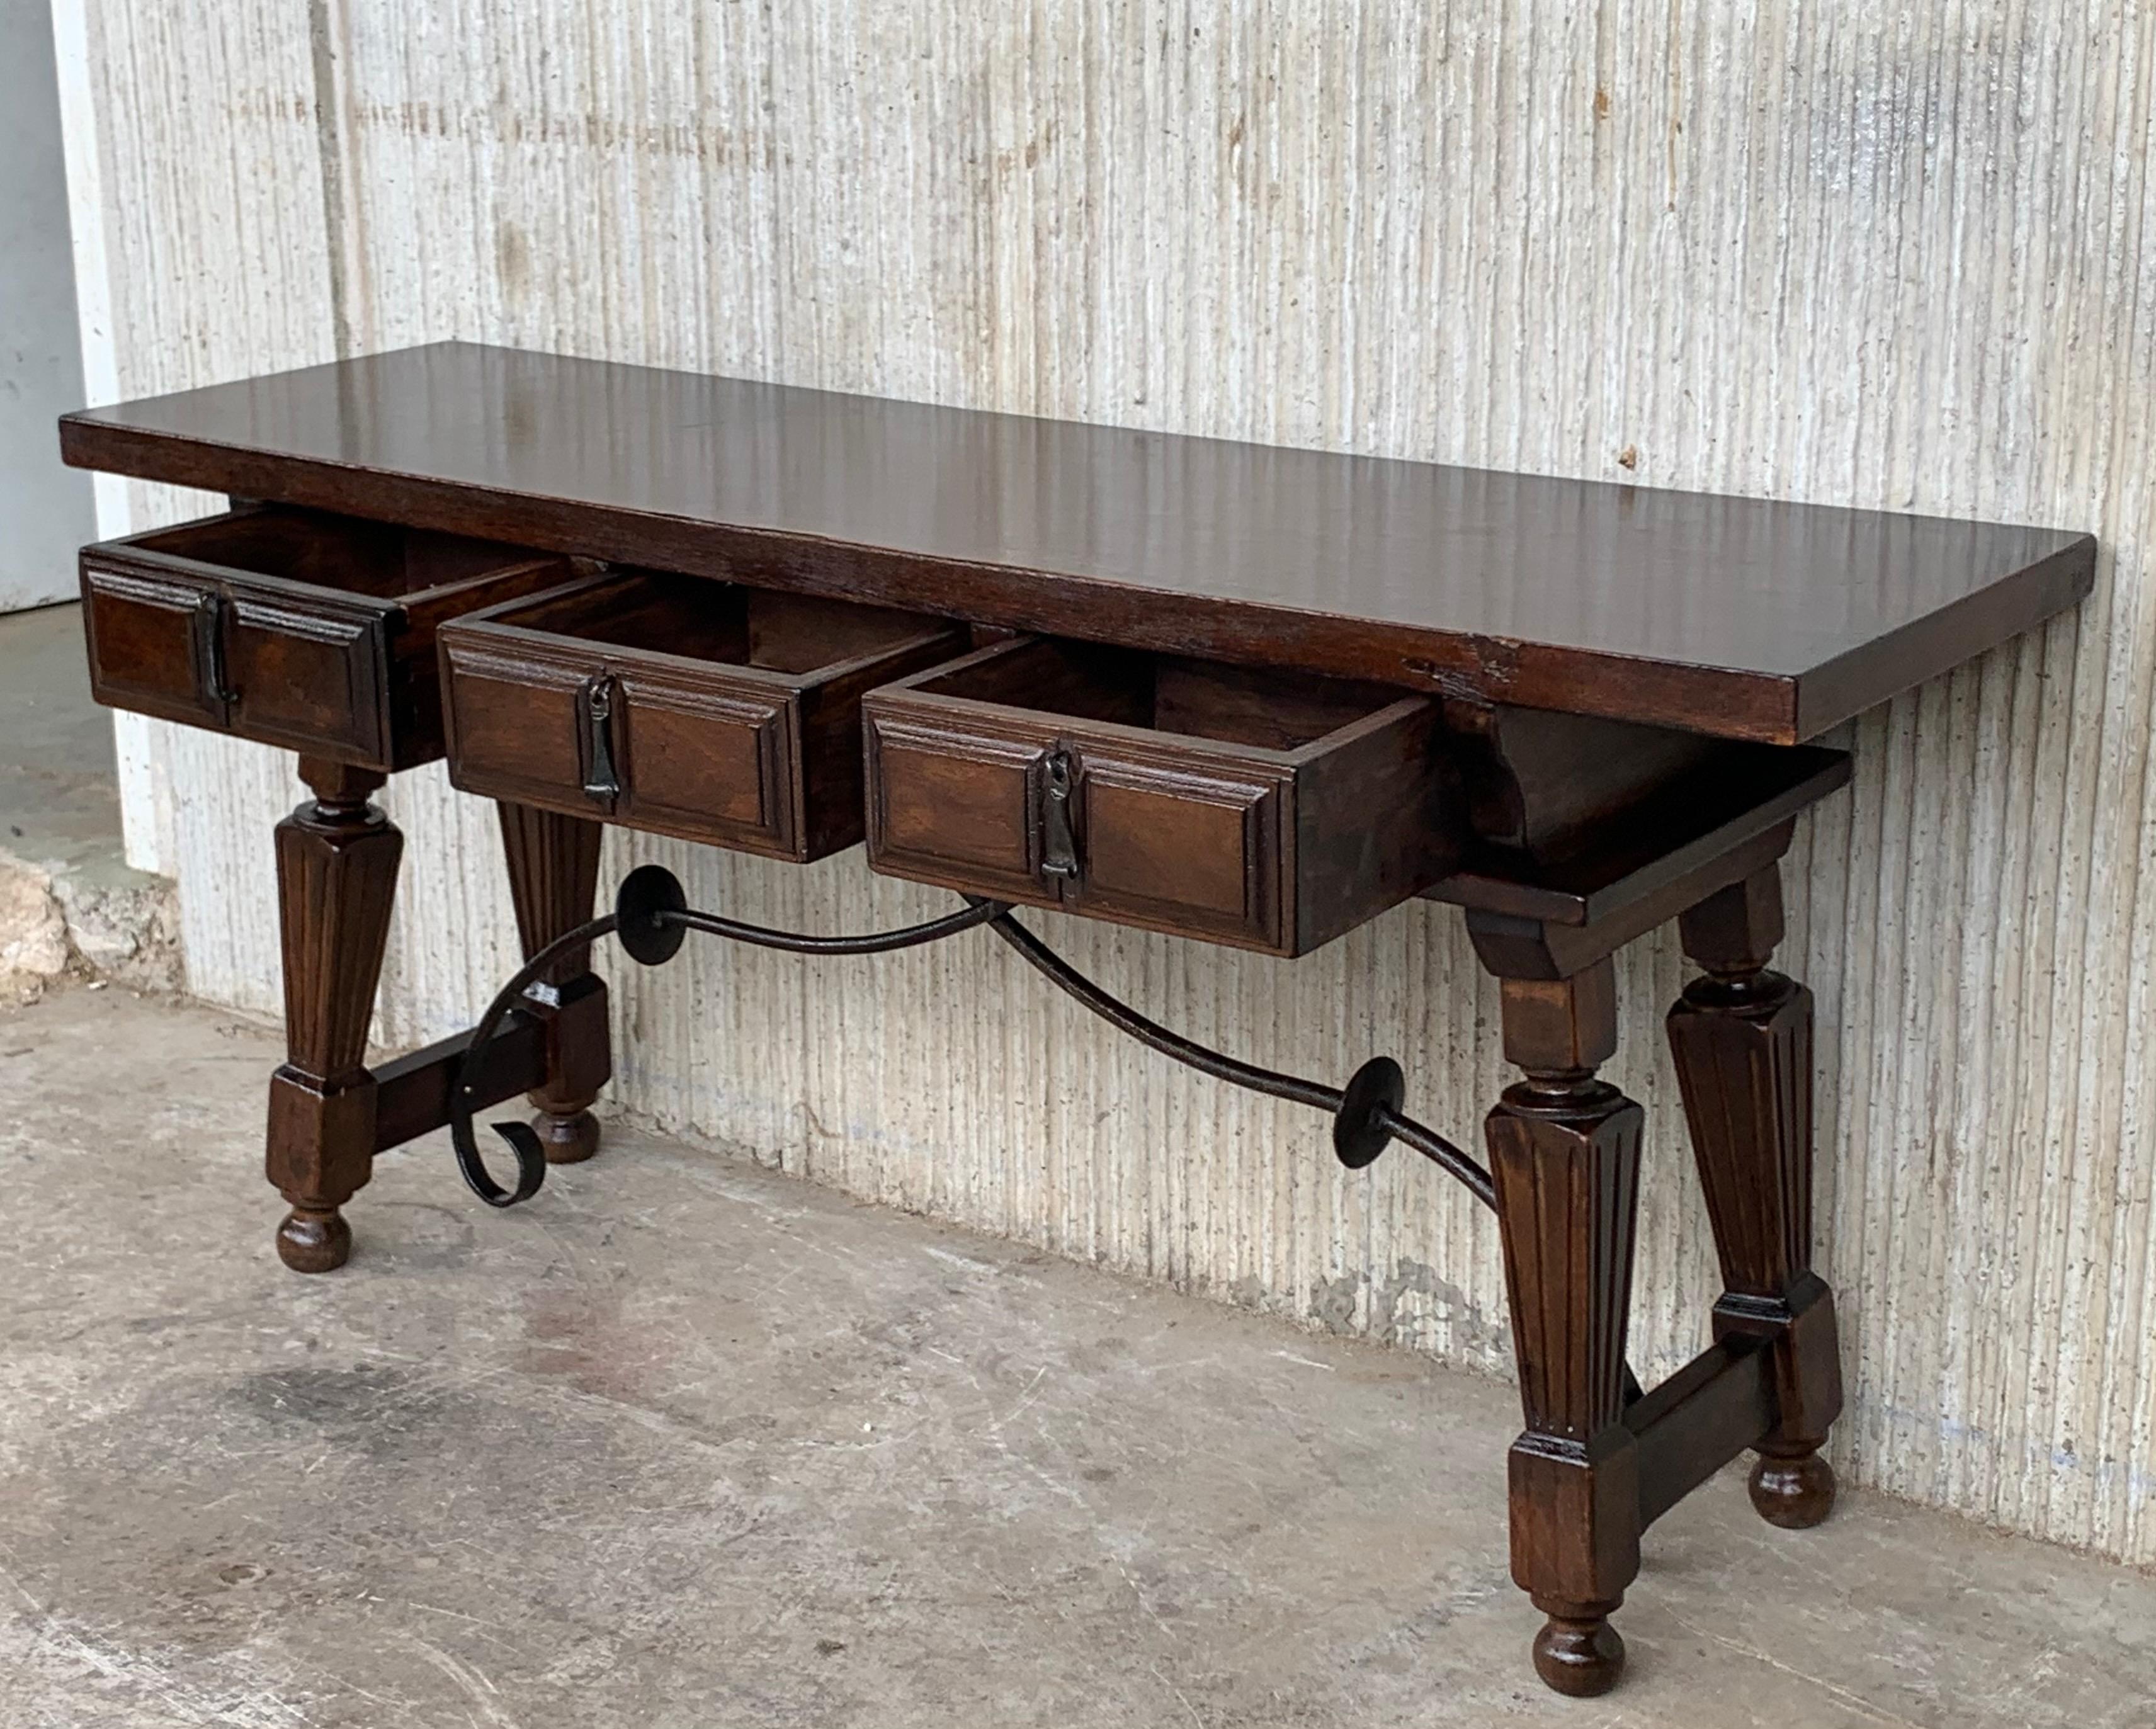 19th Century Spanish Bench or Low Console Table with Carved Drawers and Iron Stretcher